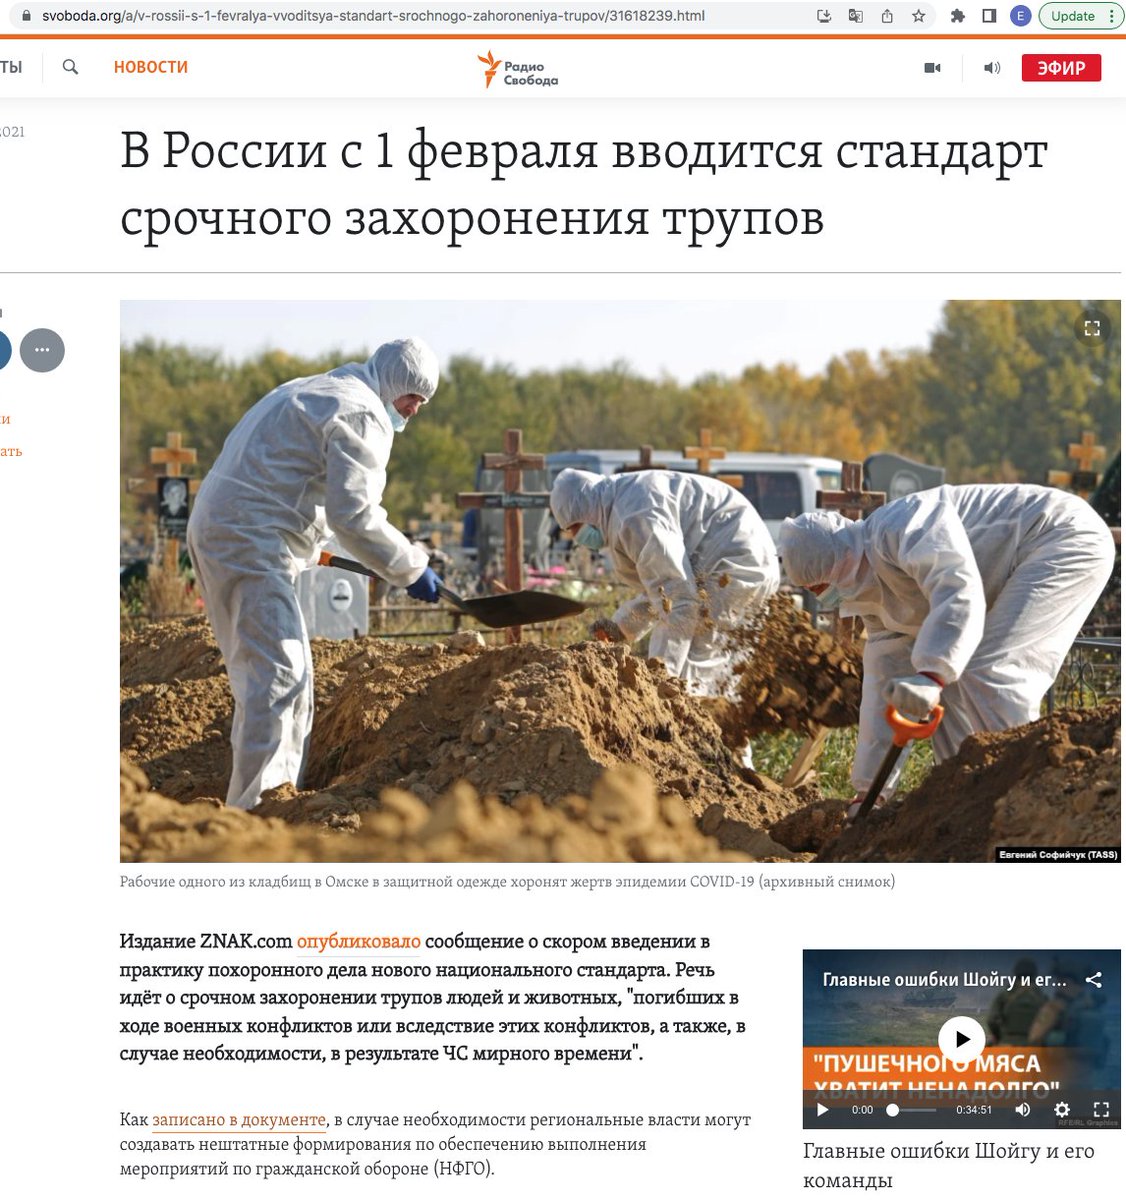 According to experts, the size of mass graves foreseen by this new Russian technical standard, "are thinkable only for a nuclear war or a pandemic". Looks like these graves were also foreseen for Ukrainians, as Russians published on 26th Feb their official article on "victory".